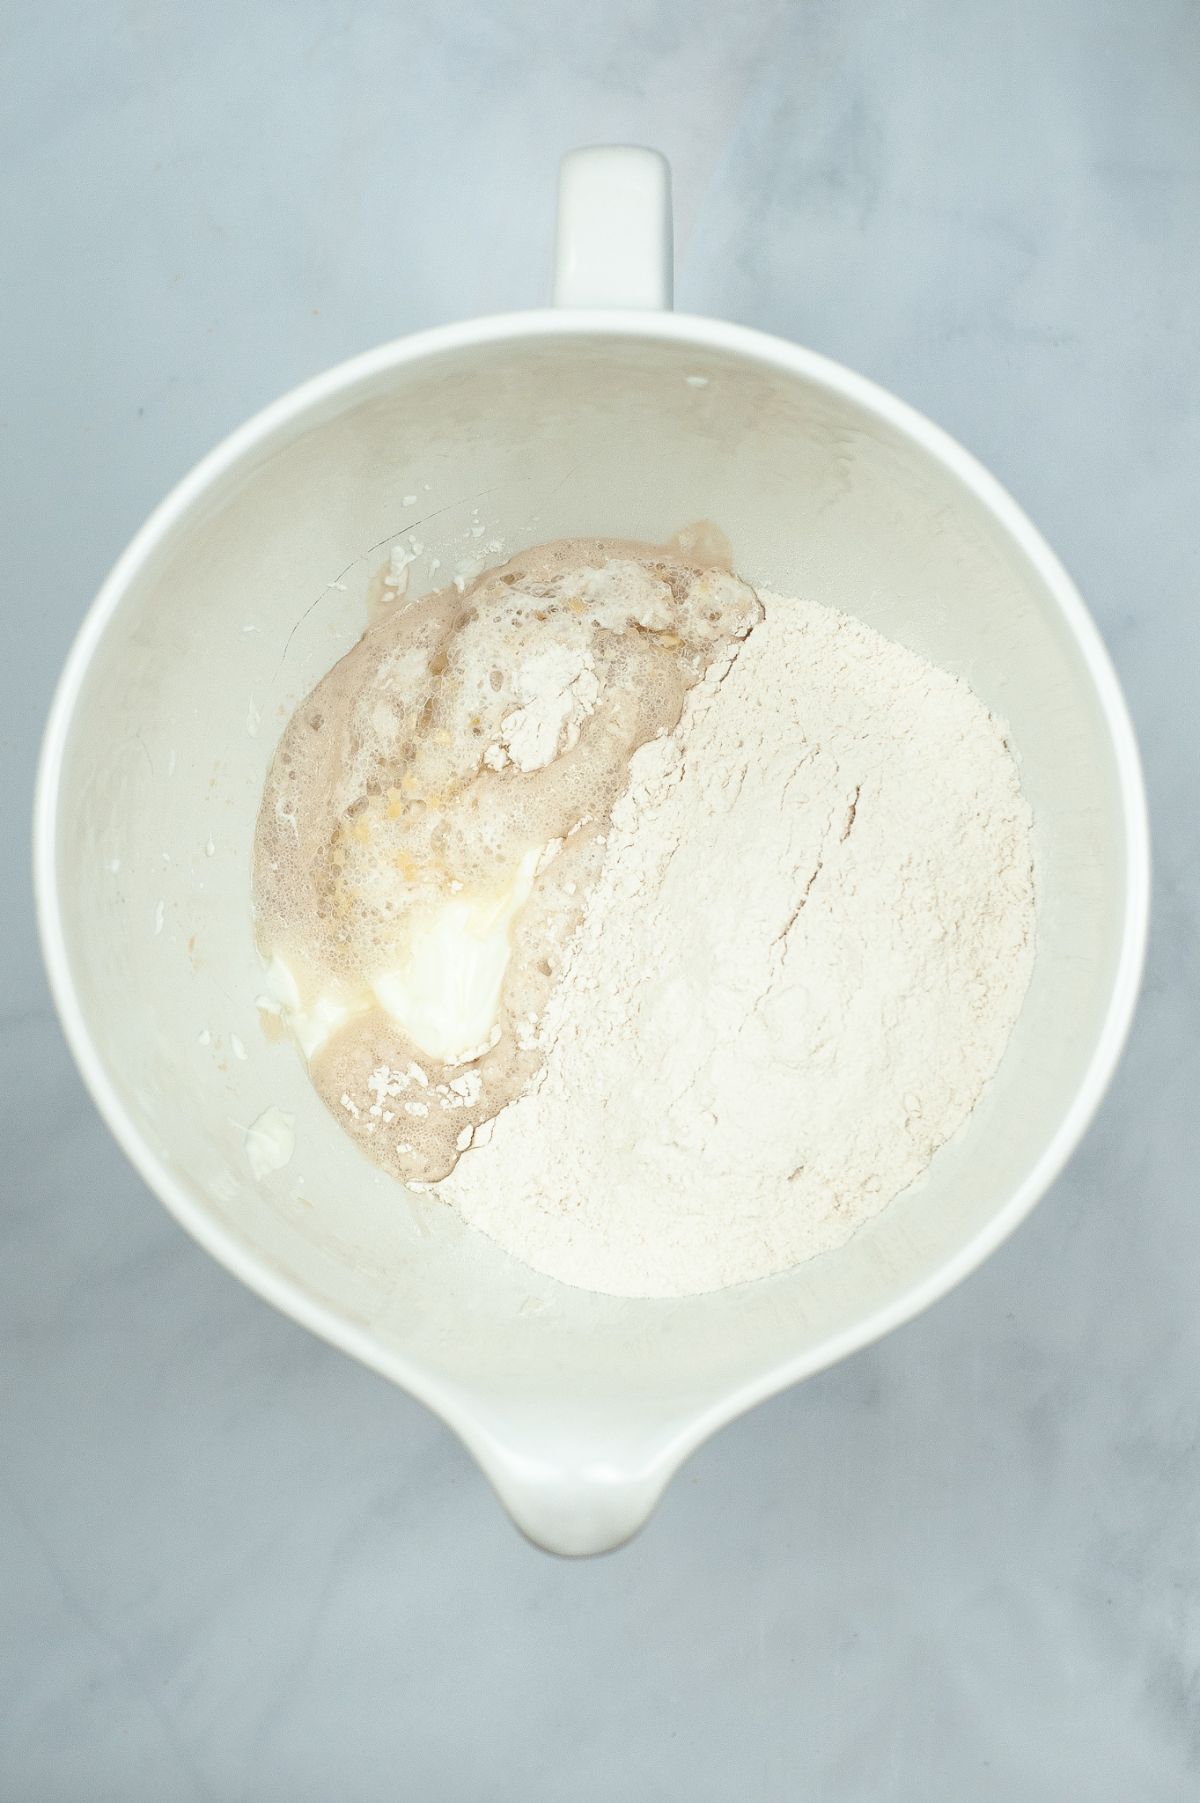 Dry yeast, water, and sugar combined in a mixing bowl.